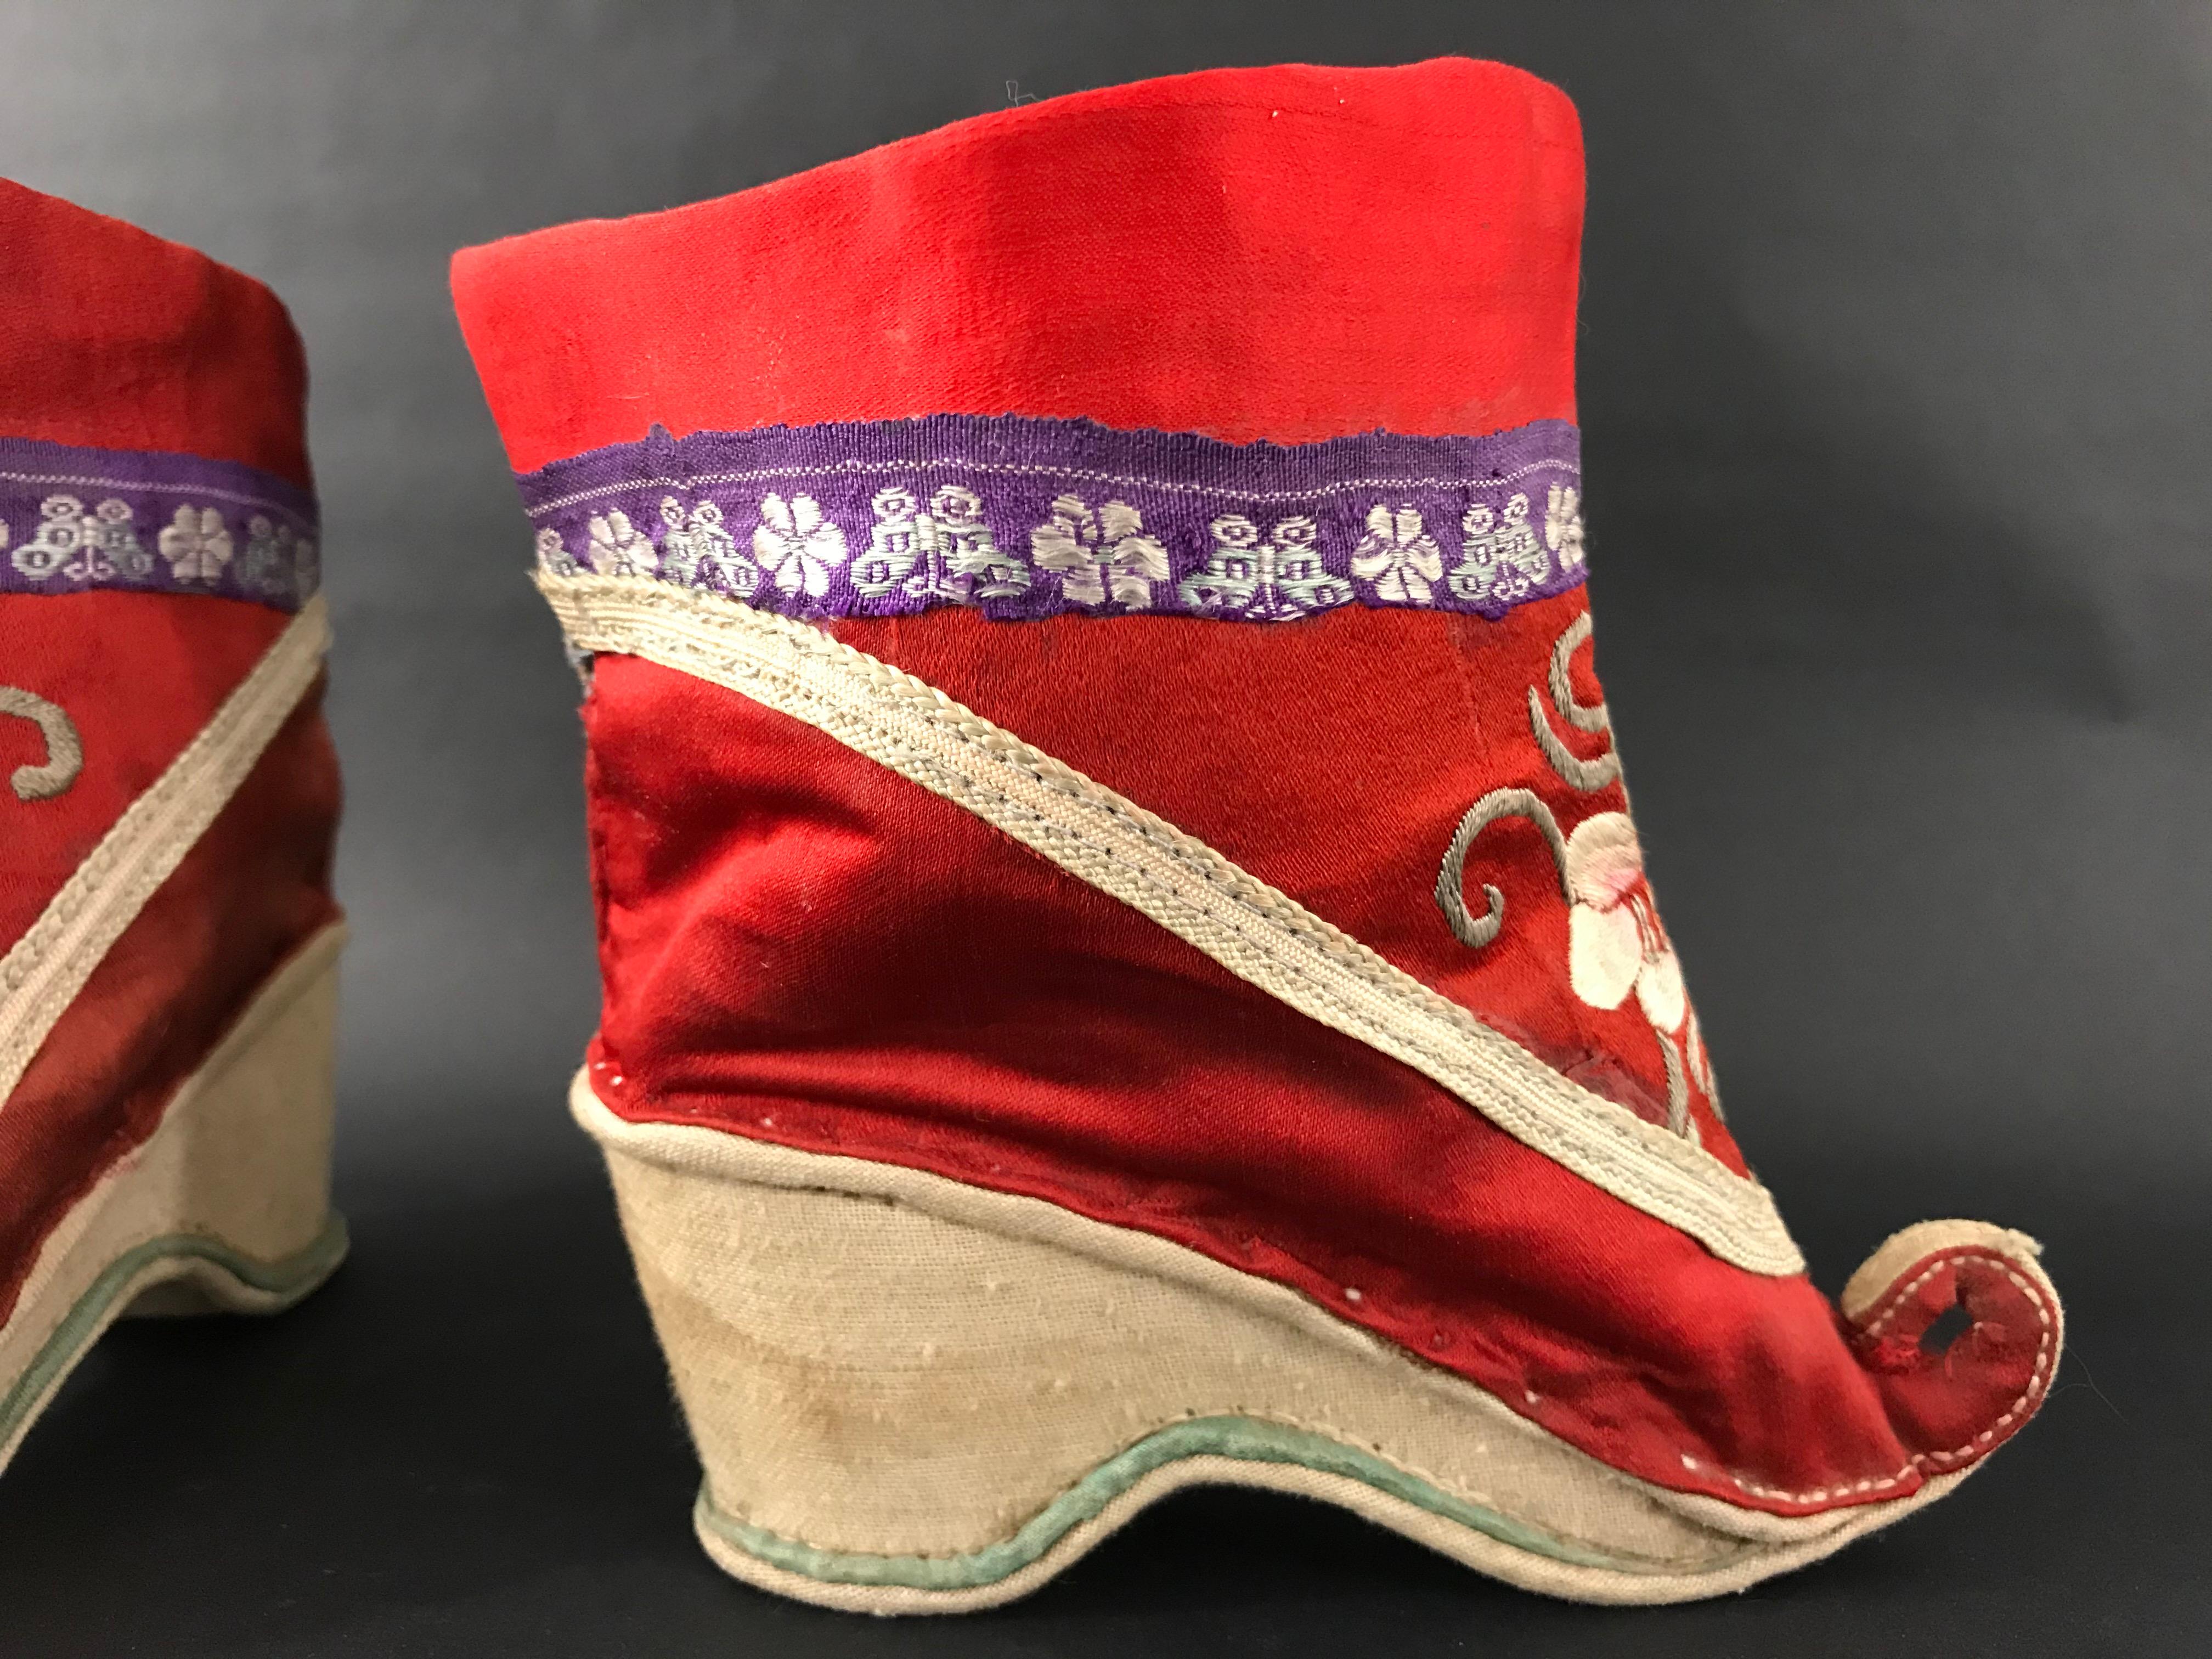 Embroidered Woman's Footwear with Bandaged Feet, China, circa 1900